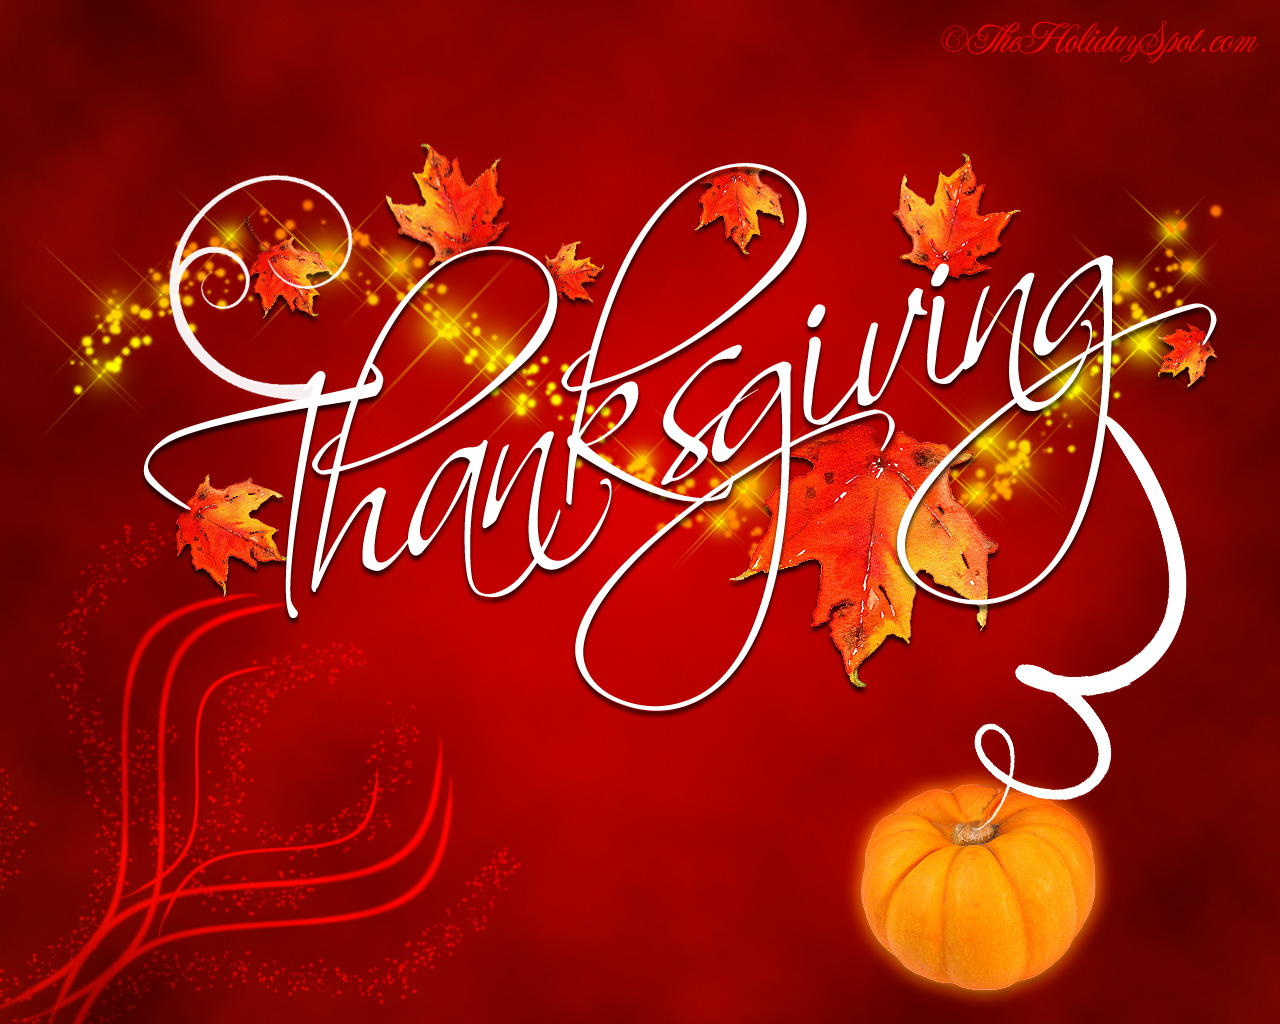 Free download high definition thanksgiving wallpapers thanksgiving backgrou...